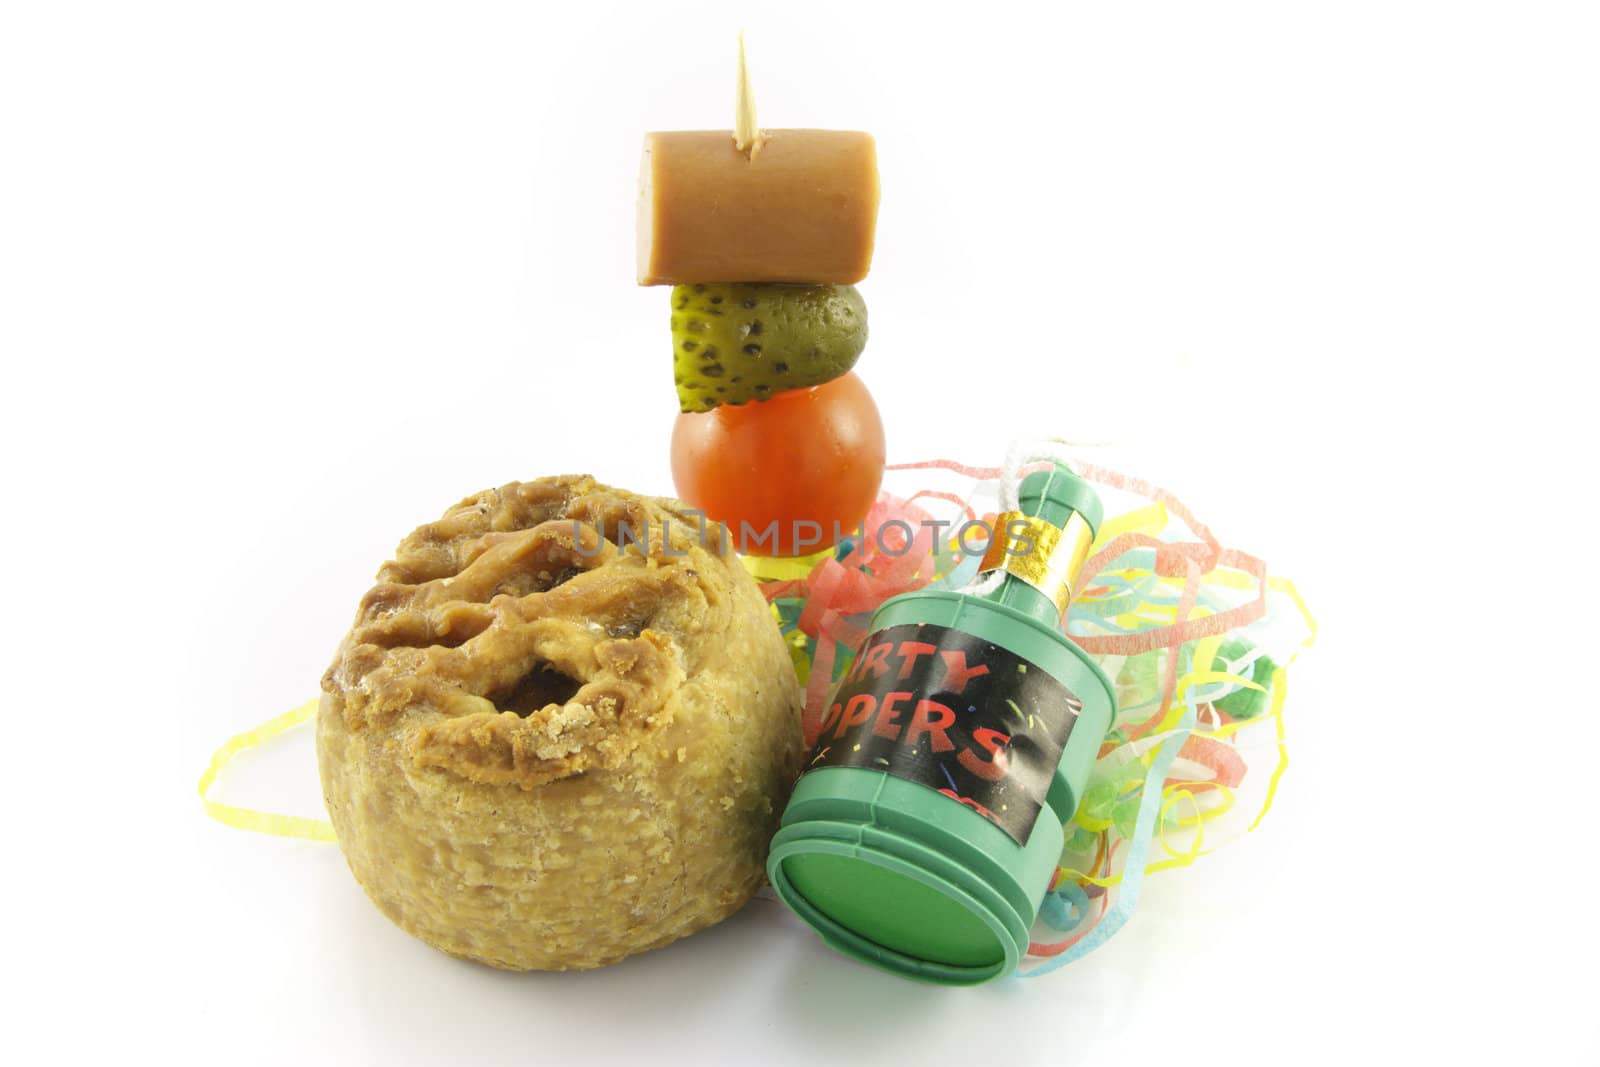 Small pork pie with party popper and cocktail stick containing hot dog sauage, gherkin and tomato with streamers on a reflective white background